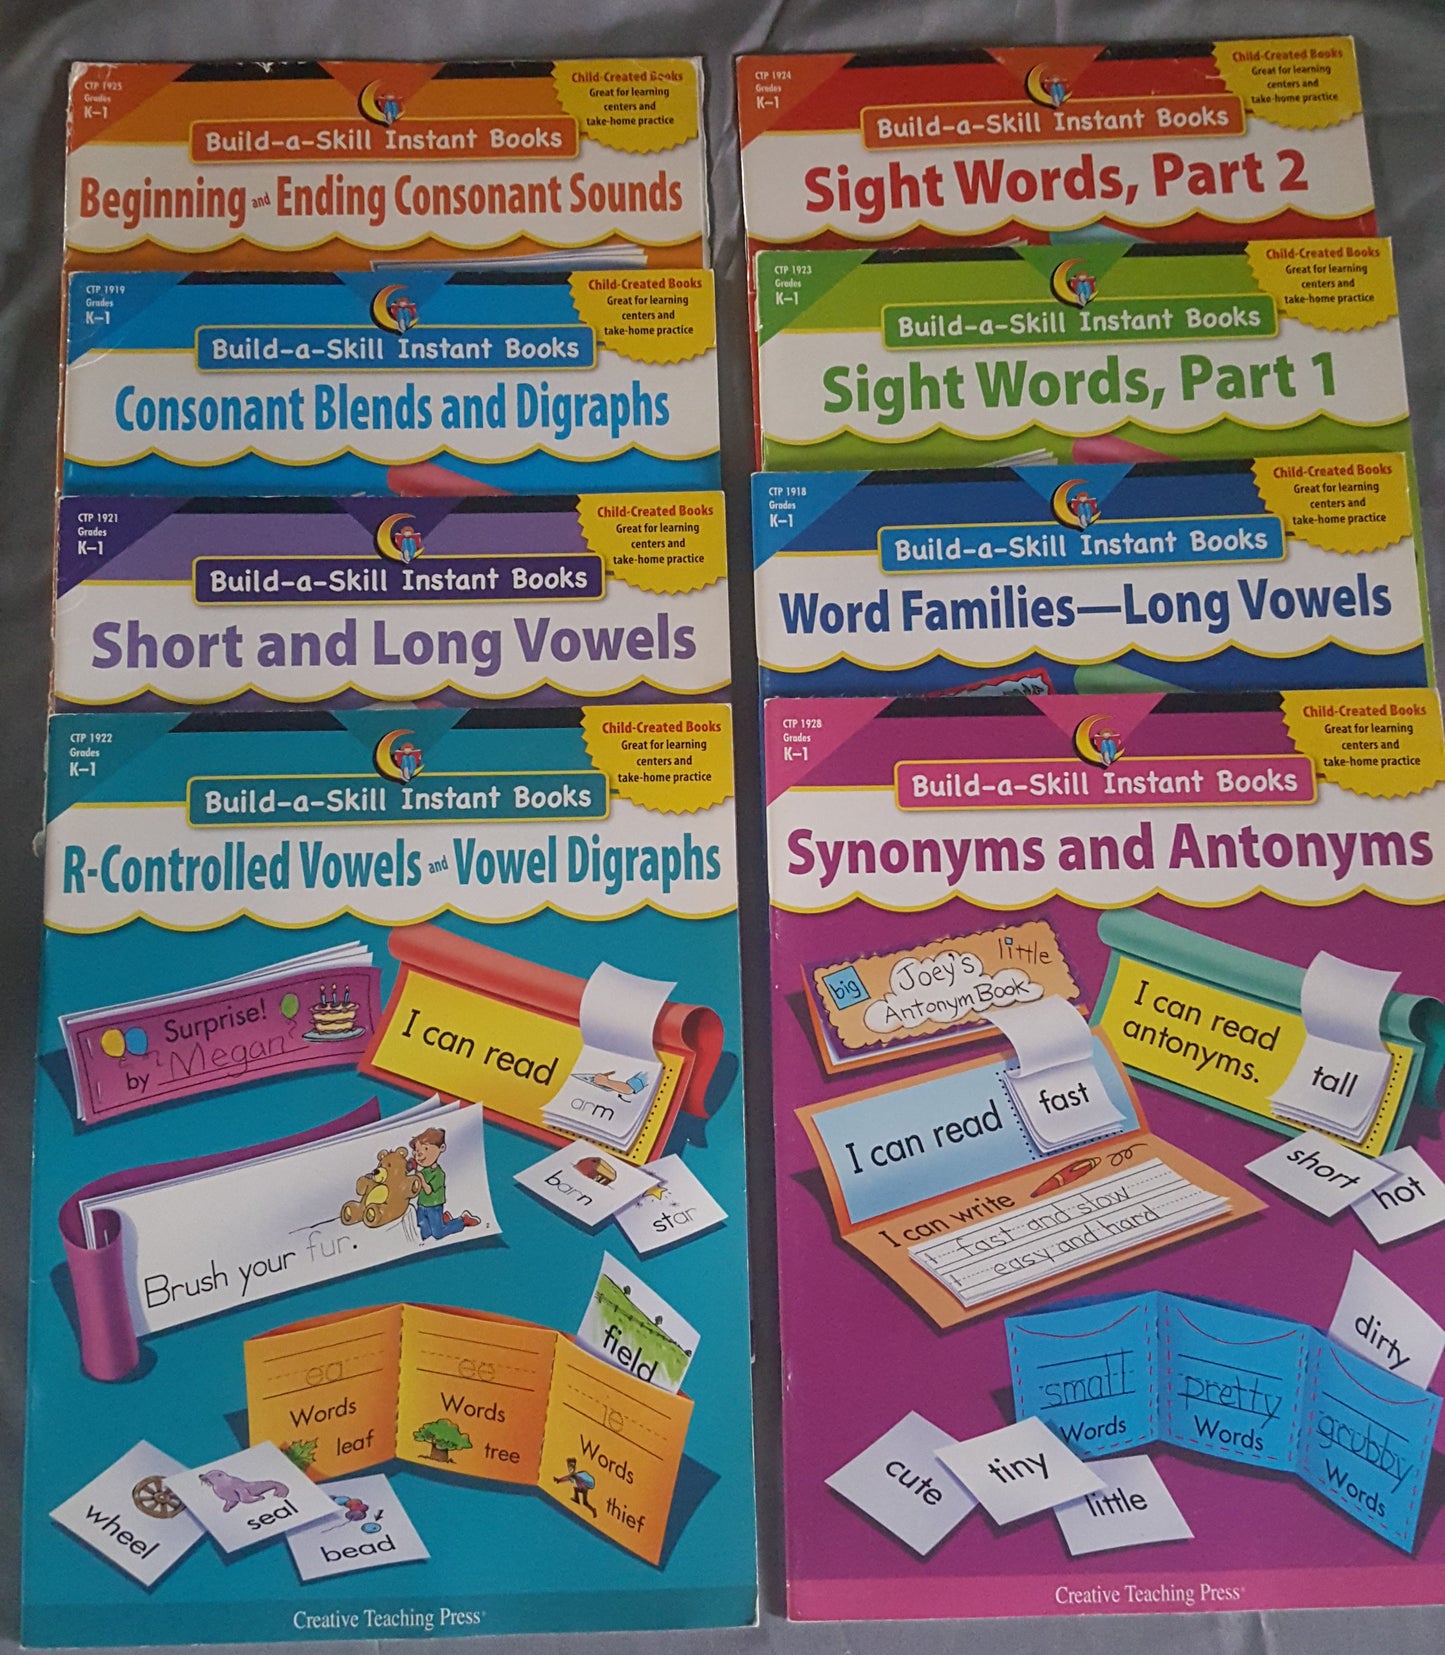 Build a Skill Instant Books 8 book set covers phonics and other language arts subjects